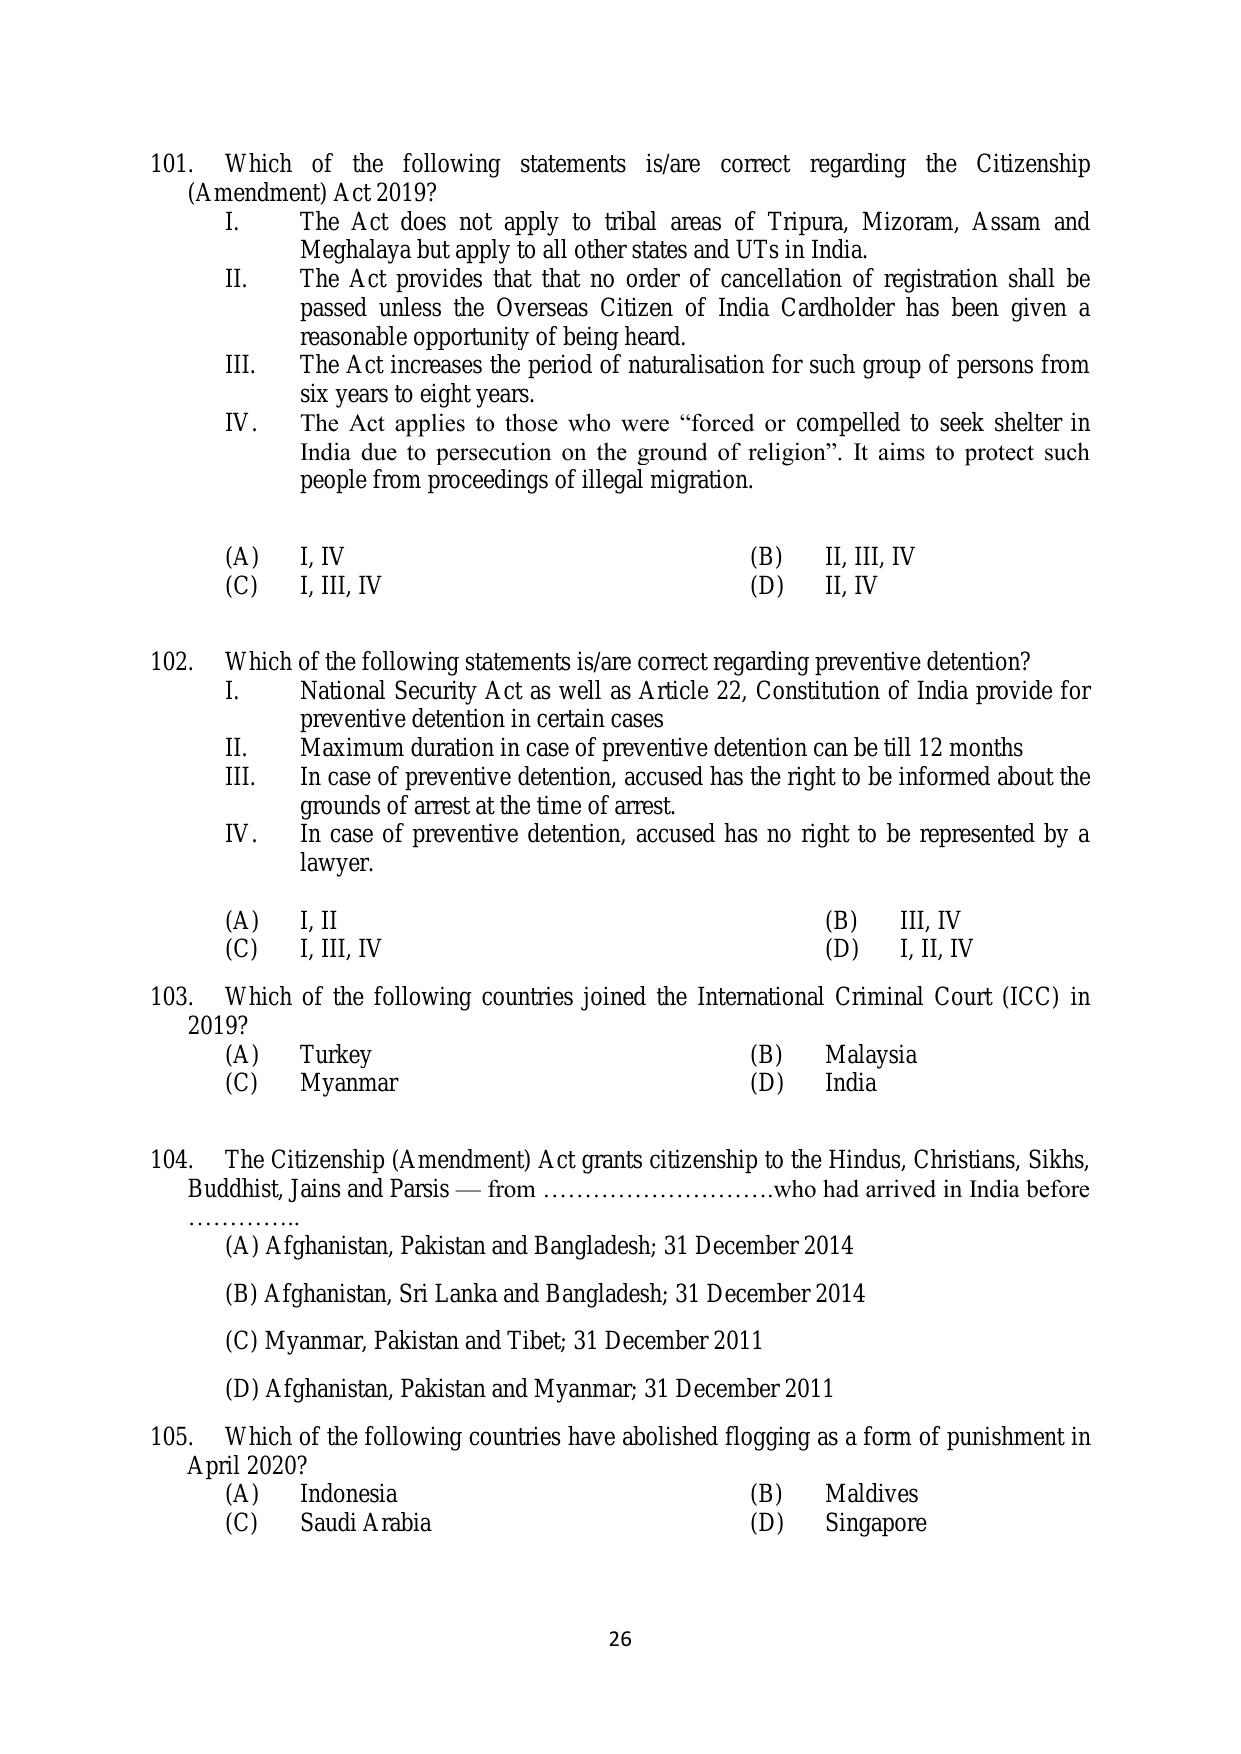 AILET 2020 Question Paper for BA LLB - Page 26